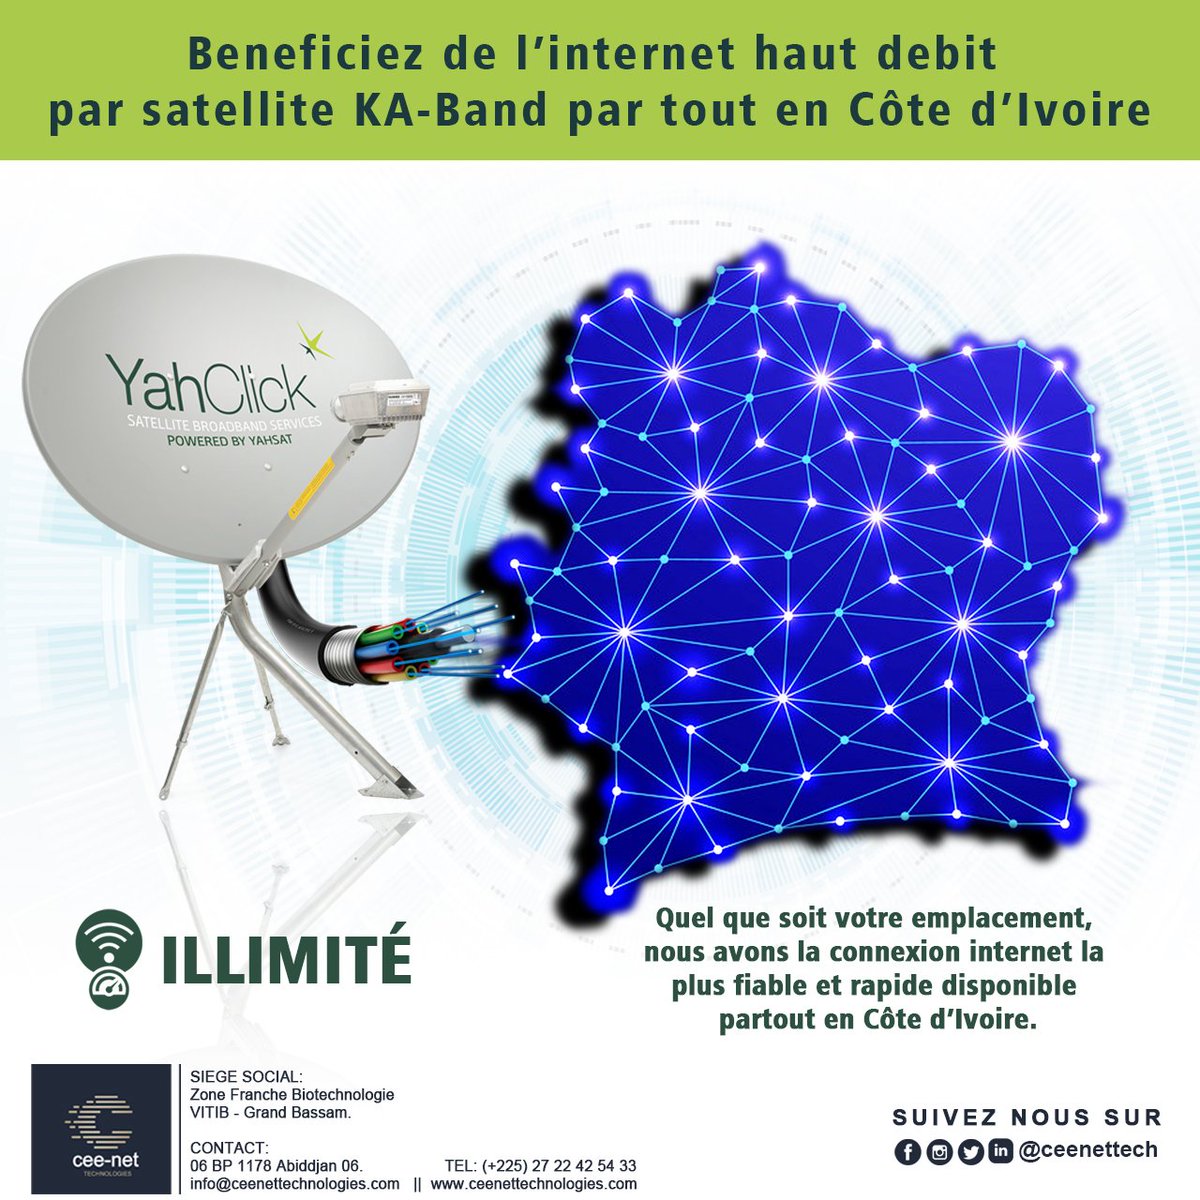 No matter what you need #internet for, @ceenettech has the most #secured and #fastest Internet connection throughout Côte d'Ivoire 🇨🇮 and beyond! Call us today for the best offer. #yahsat #ceenet #civ #technology #Africa